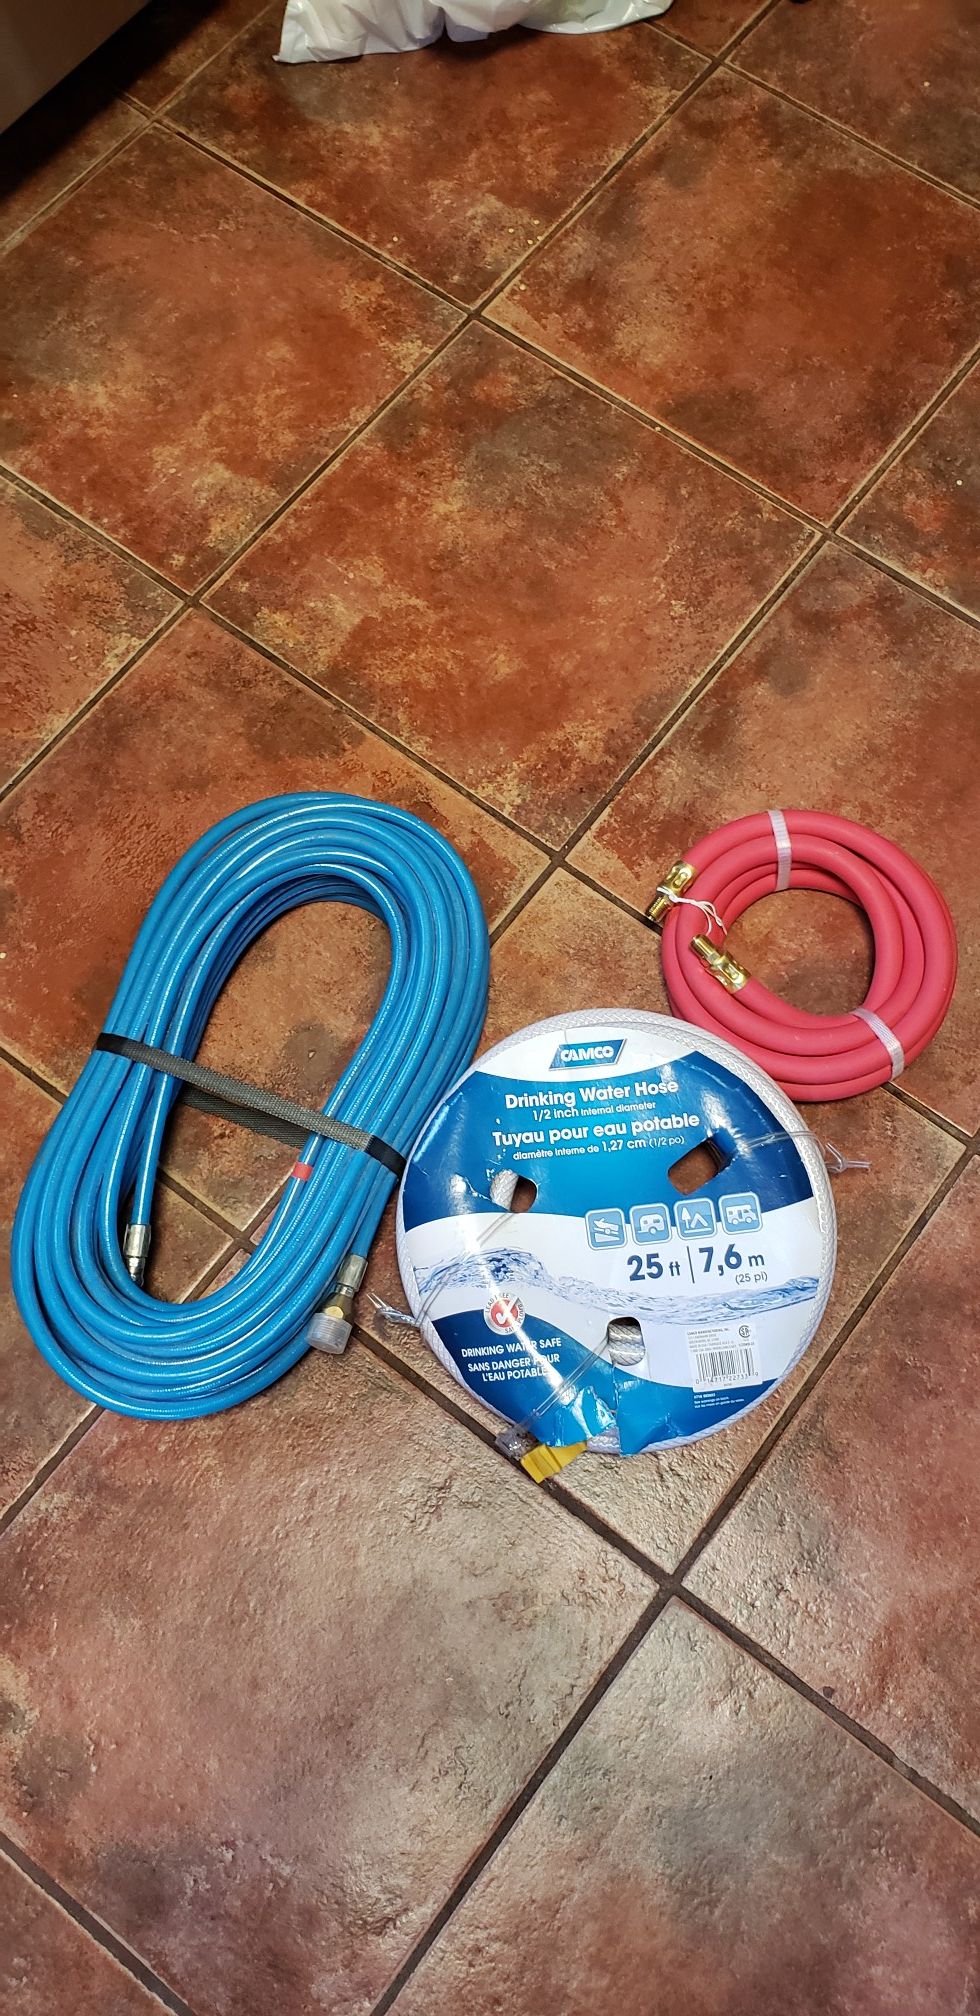 Air compressor hose and Drinking water hose